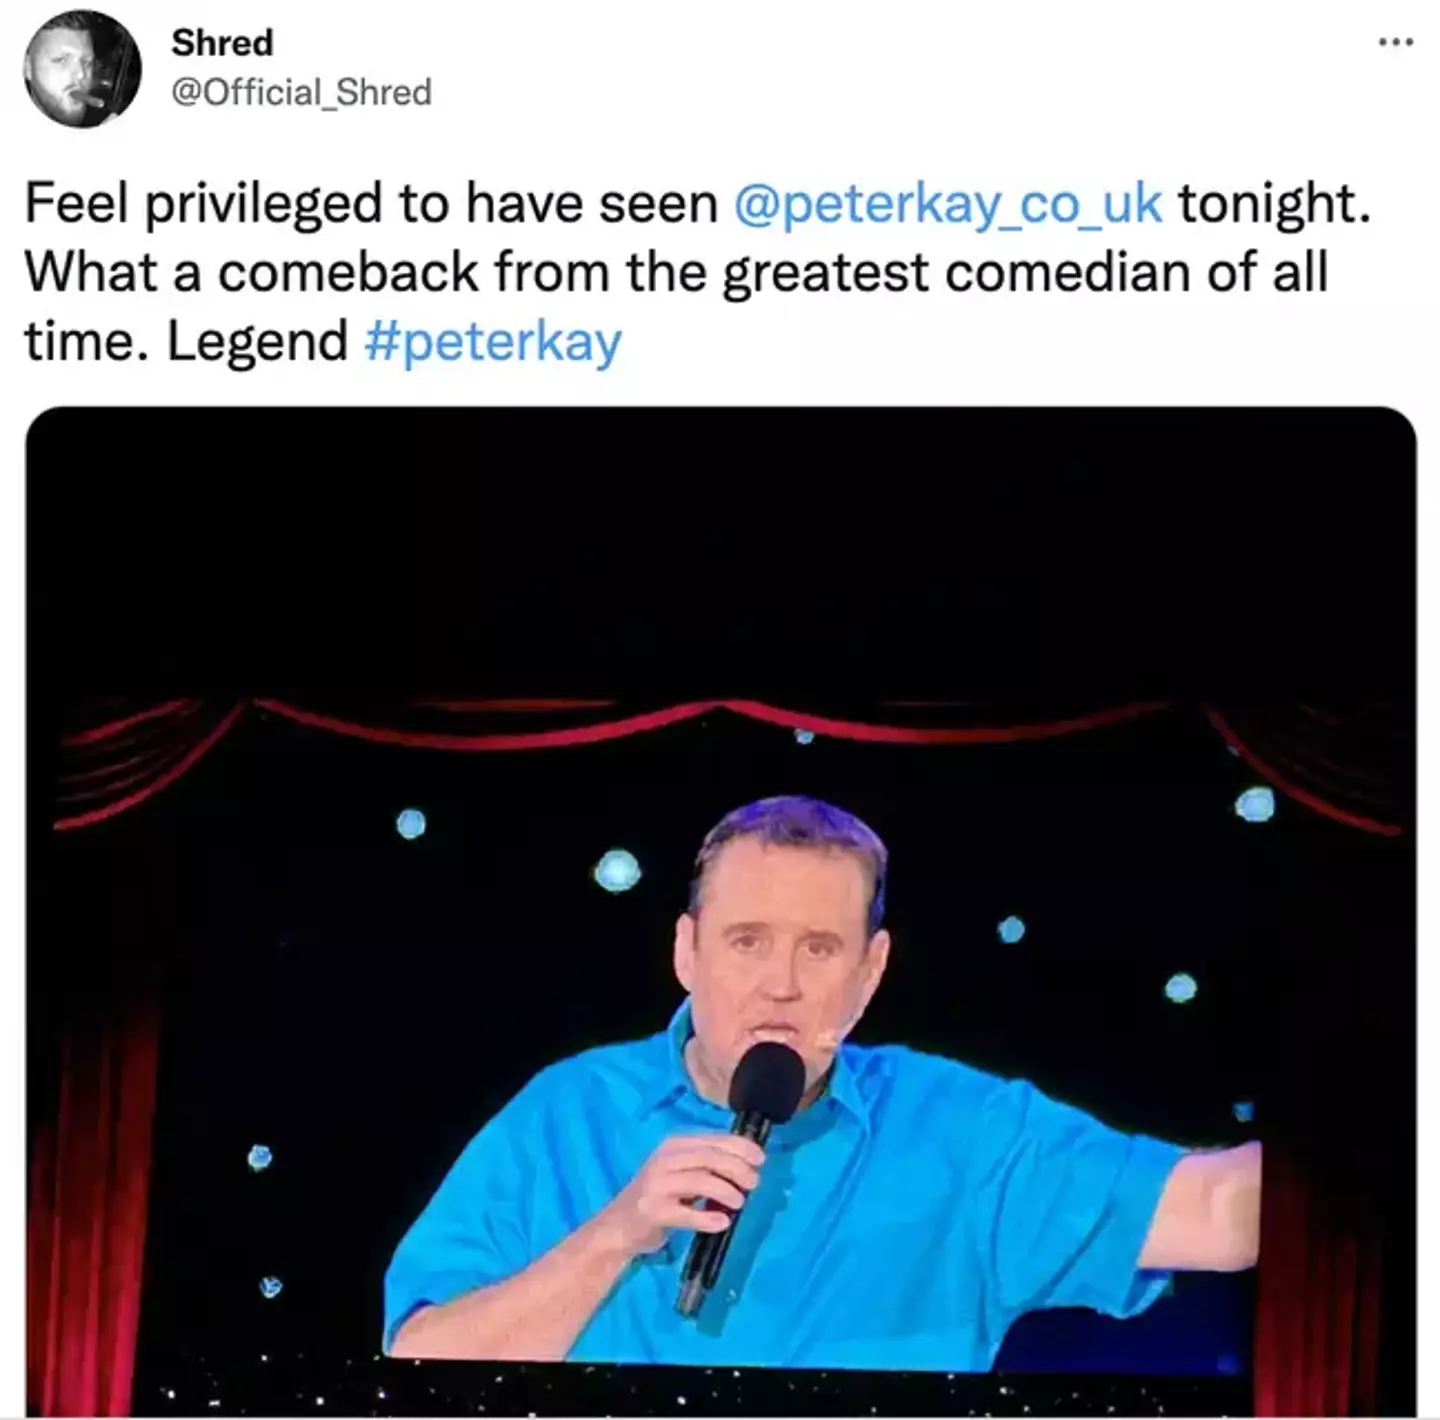 The comedian's comeback tour kicked off in Manchester on 2 December.